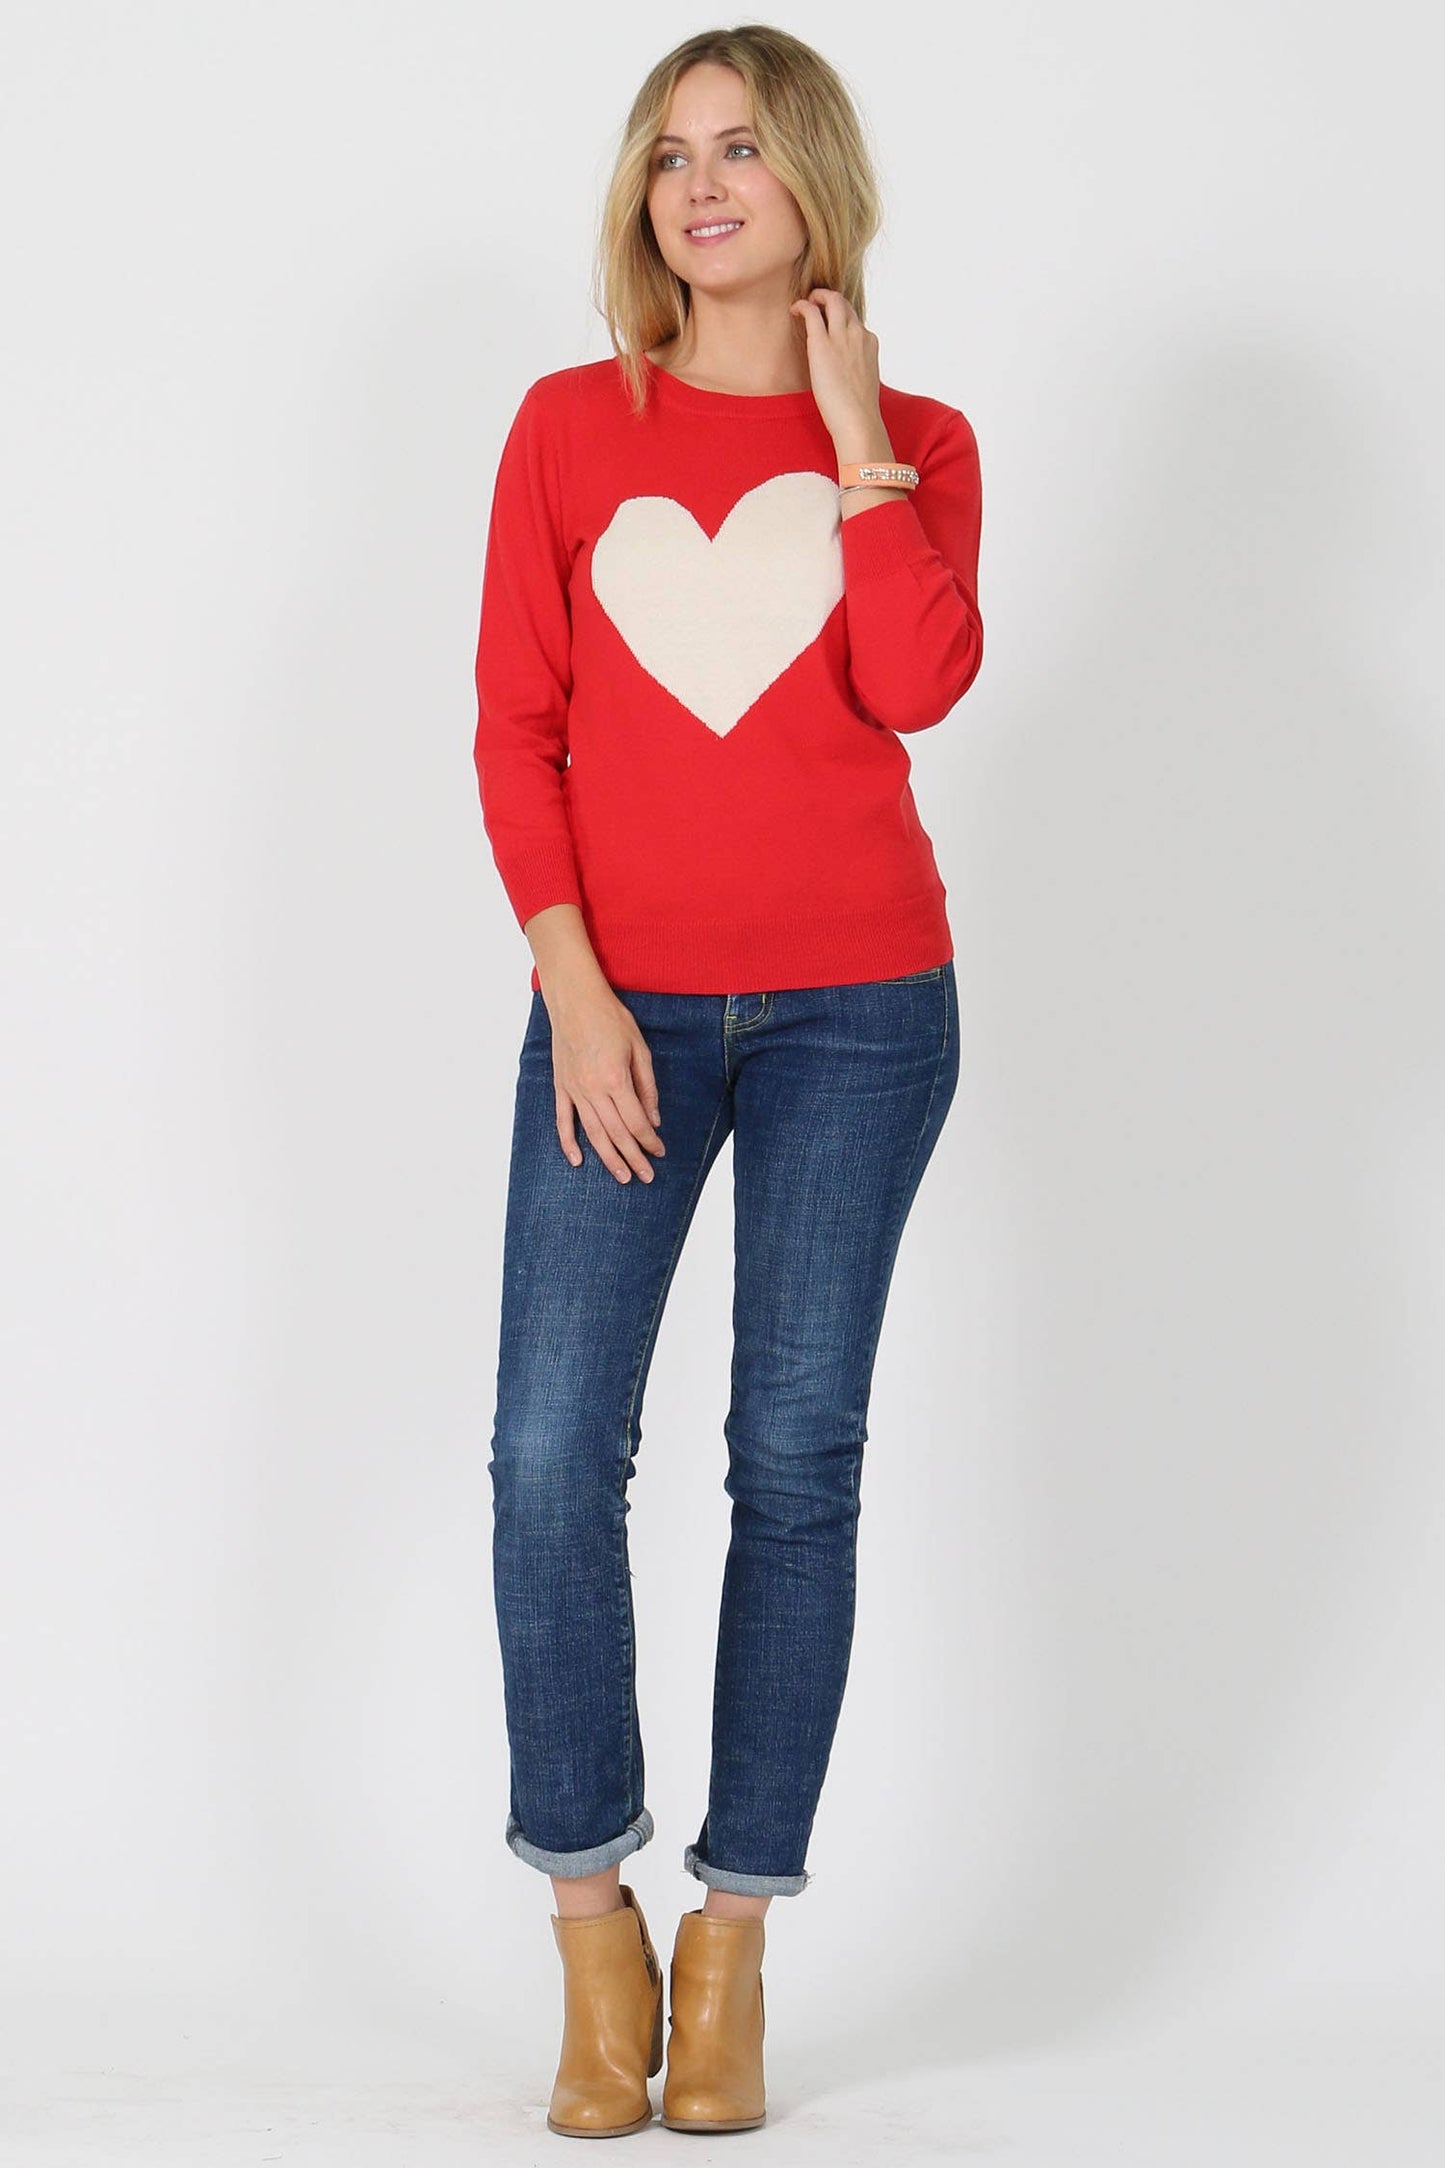 ,.SC23031 Sweet cute heart valentine pullover sweater: TOMATO/OATMEAL-23031 / M